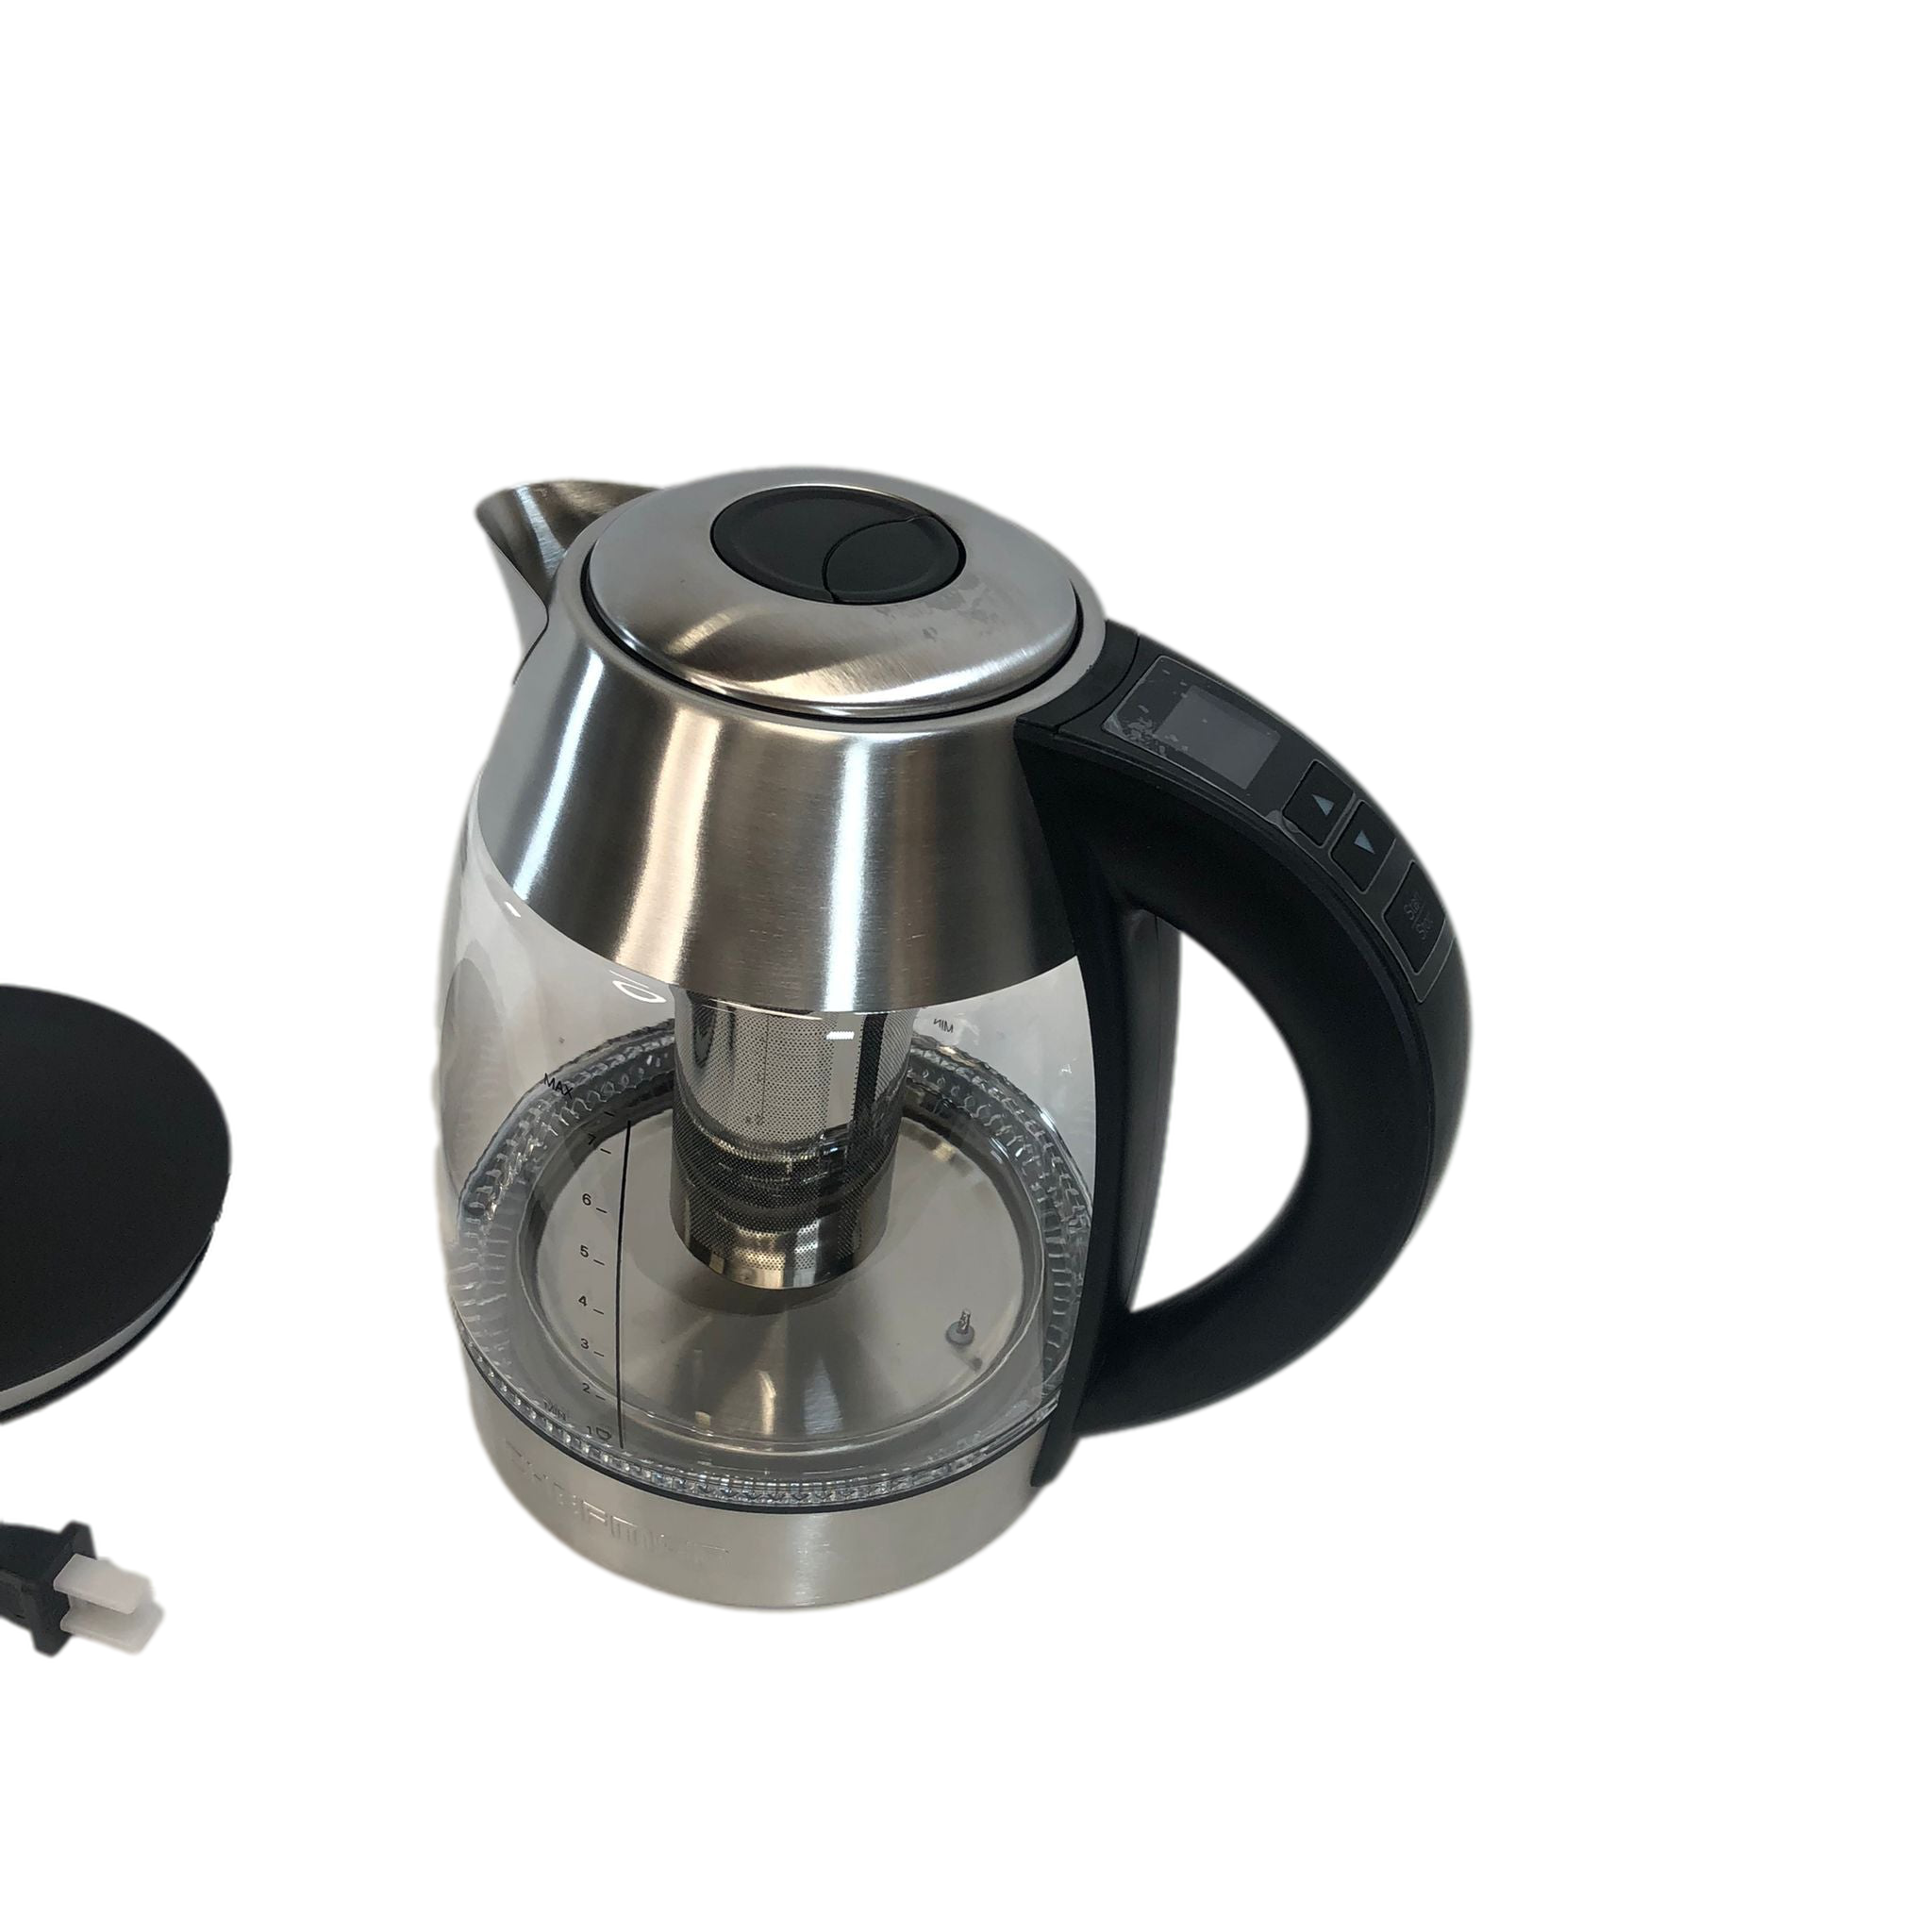 Chefman 1.8L Electric Kettle with Tea Infuser